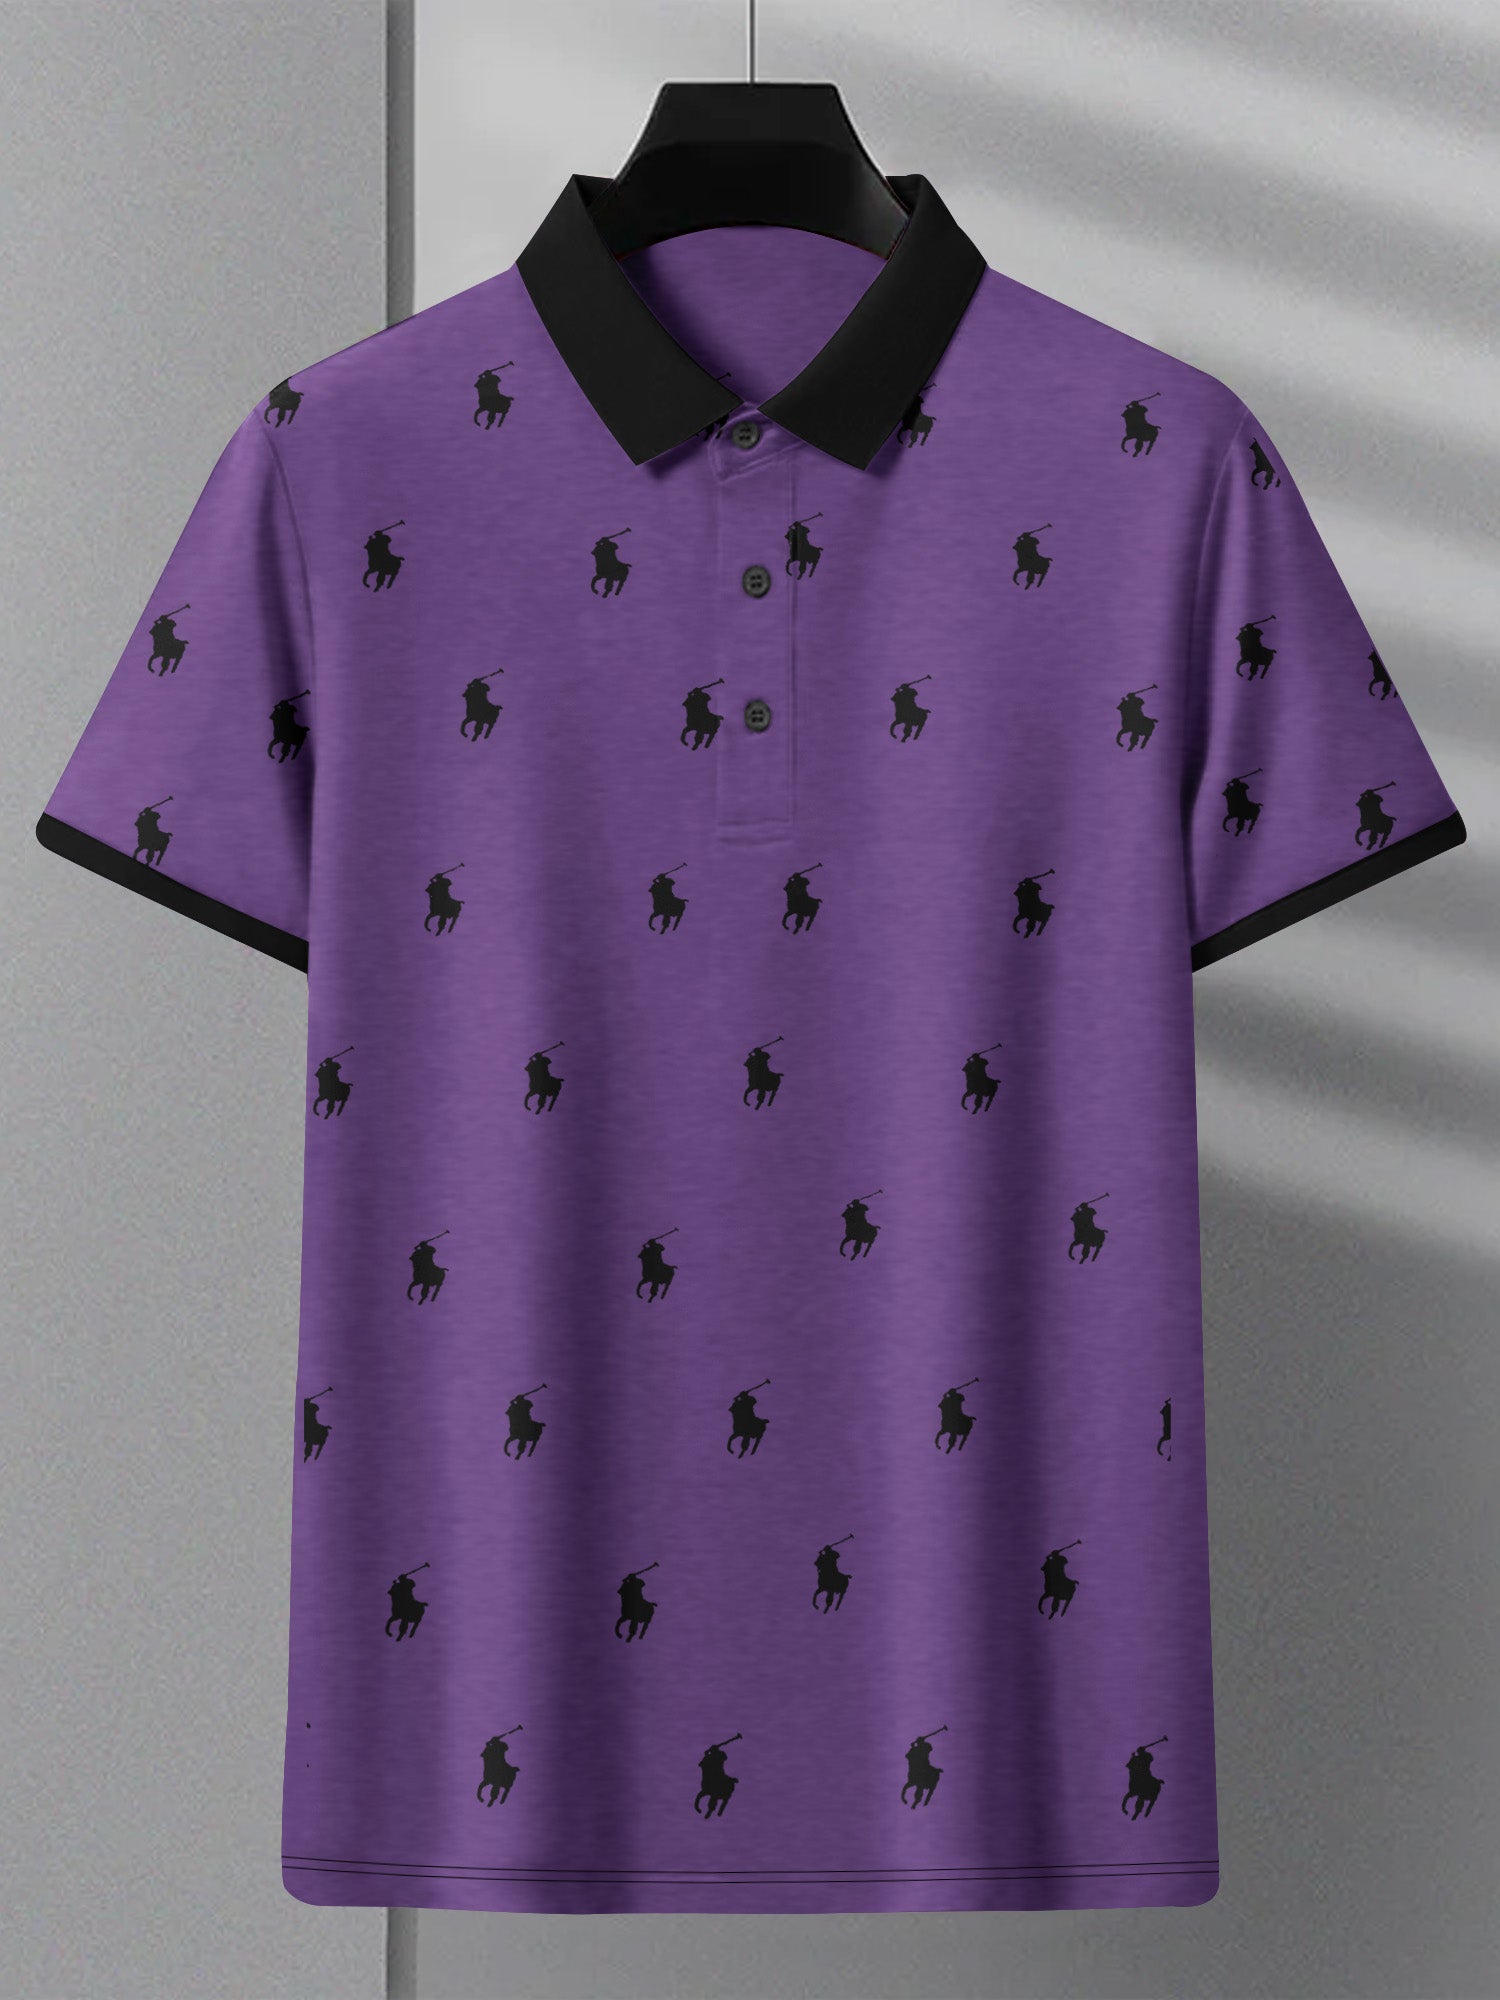 PRL Summer Polo Shirt For Men-Purple Melange with Allover Print-BE718/BR12970